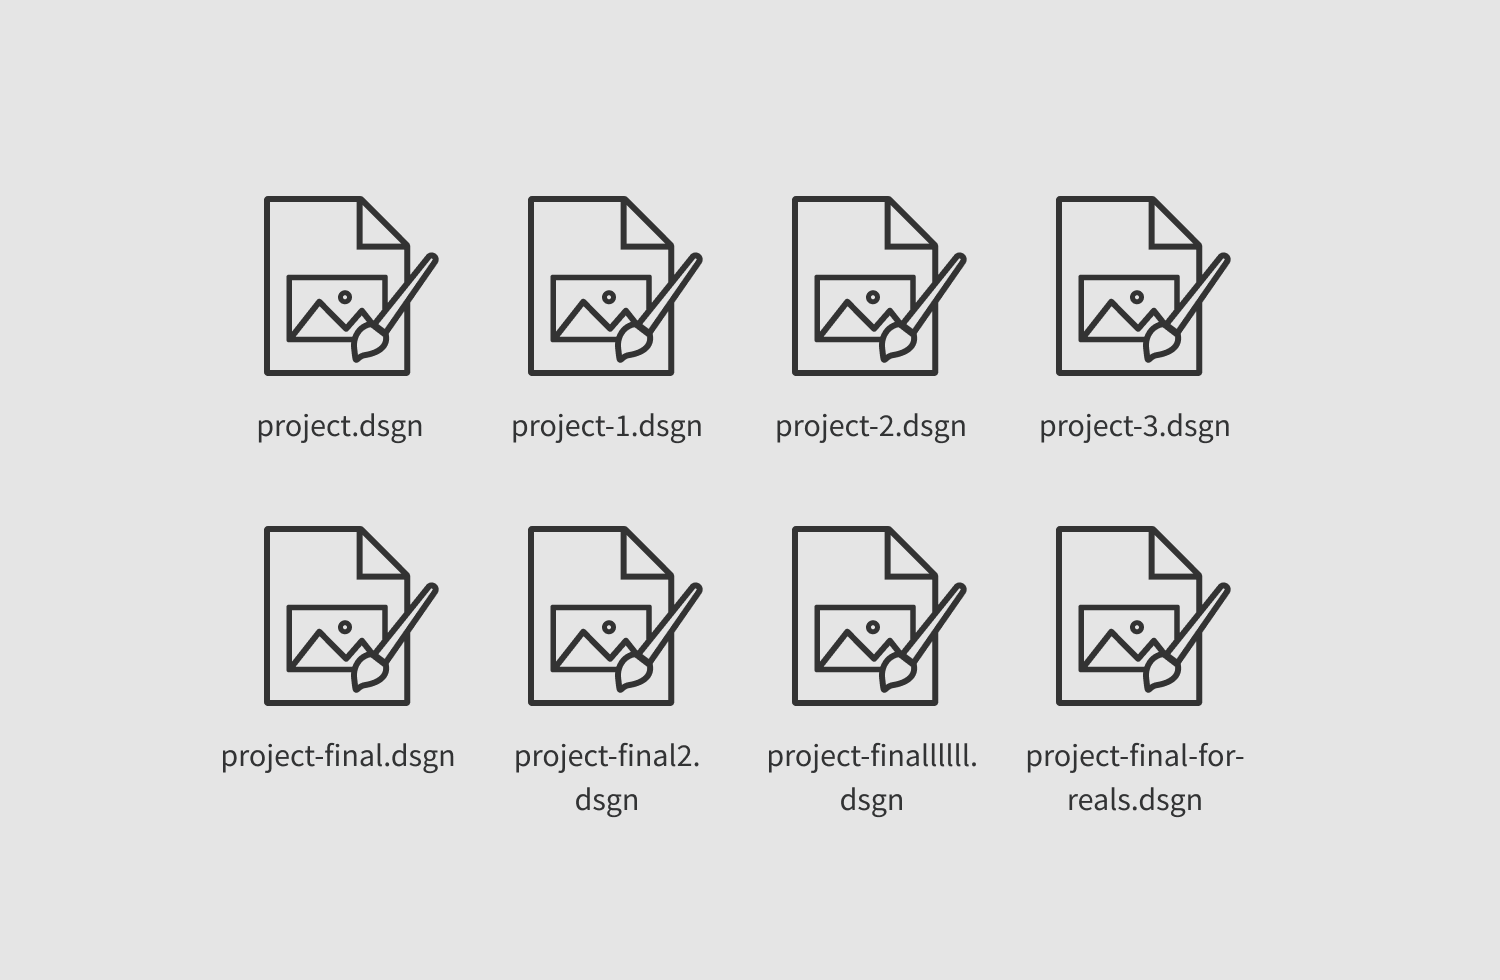 Eight design file icons with variable saved names, such as 'project.dsgn'